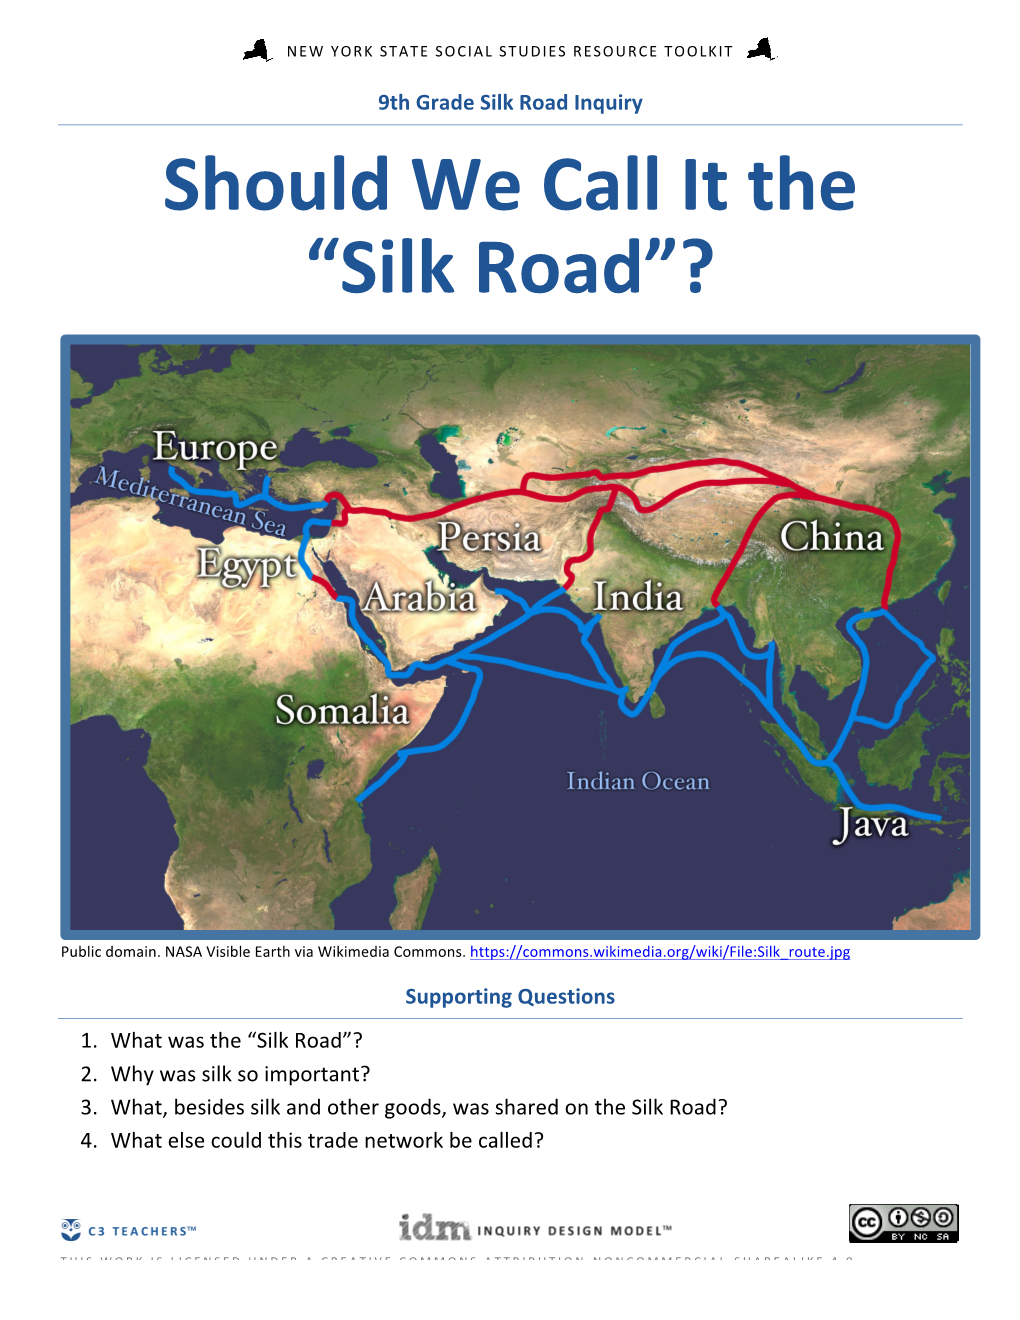 Should We Call It the “Silk Road”?